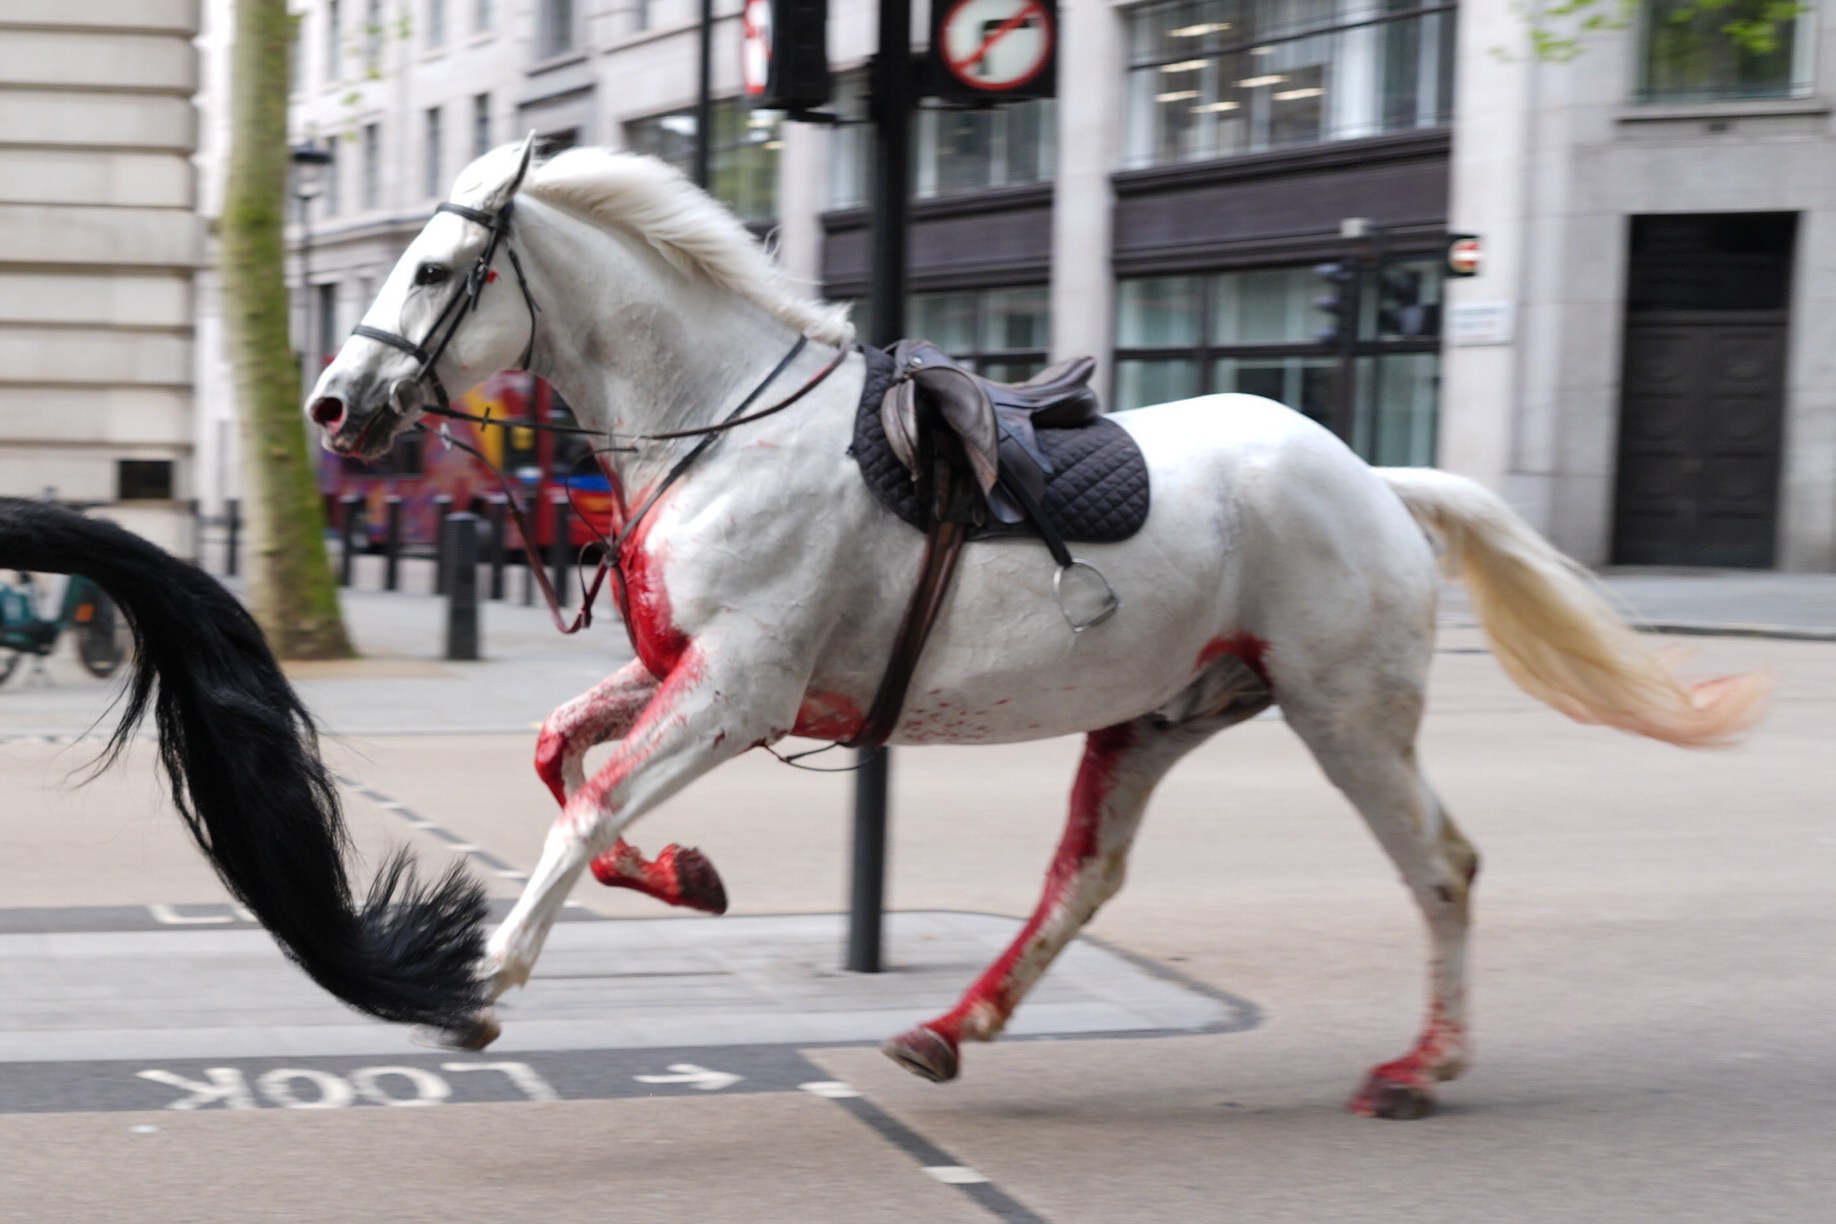 a white horse with a saddle and bridle is running down the street